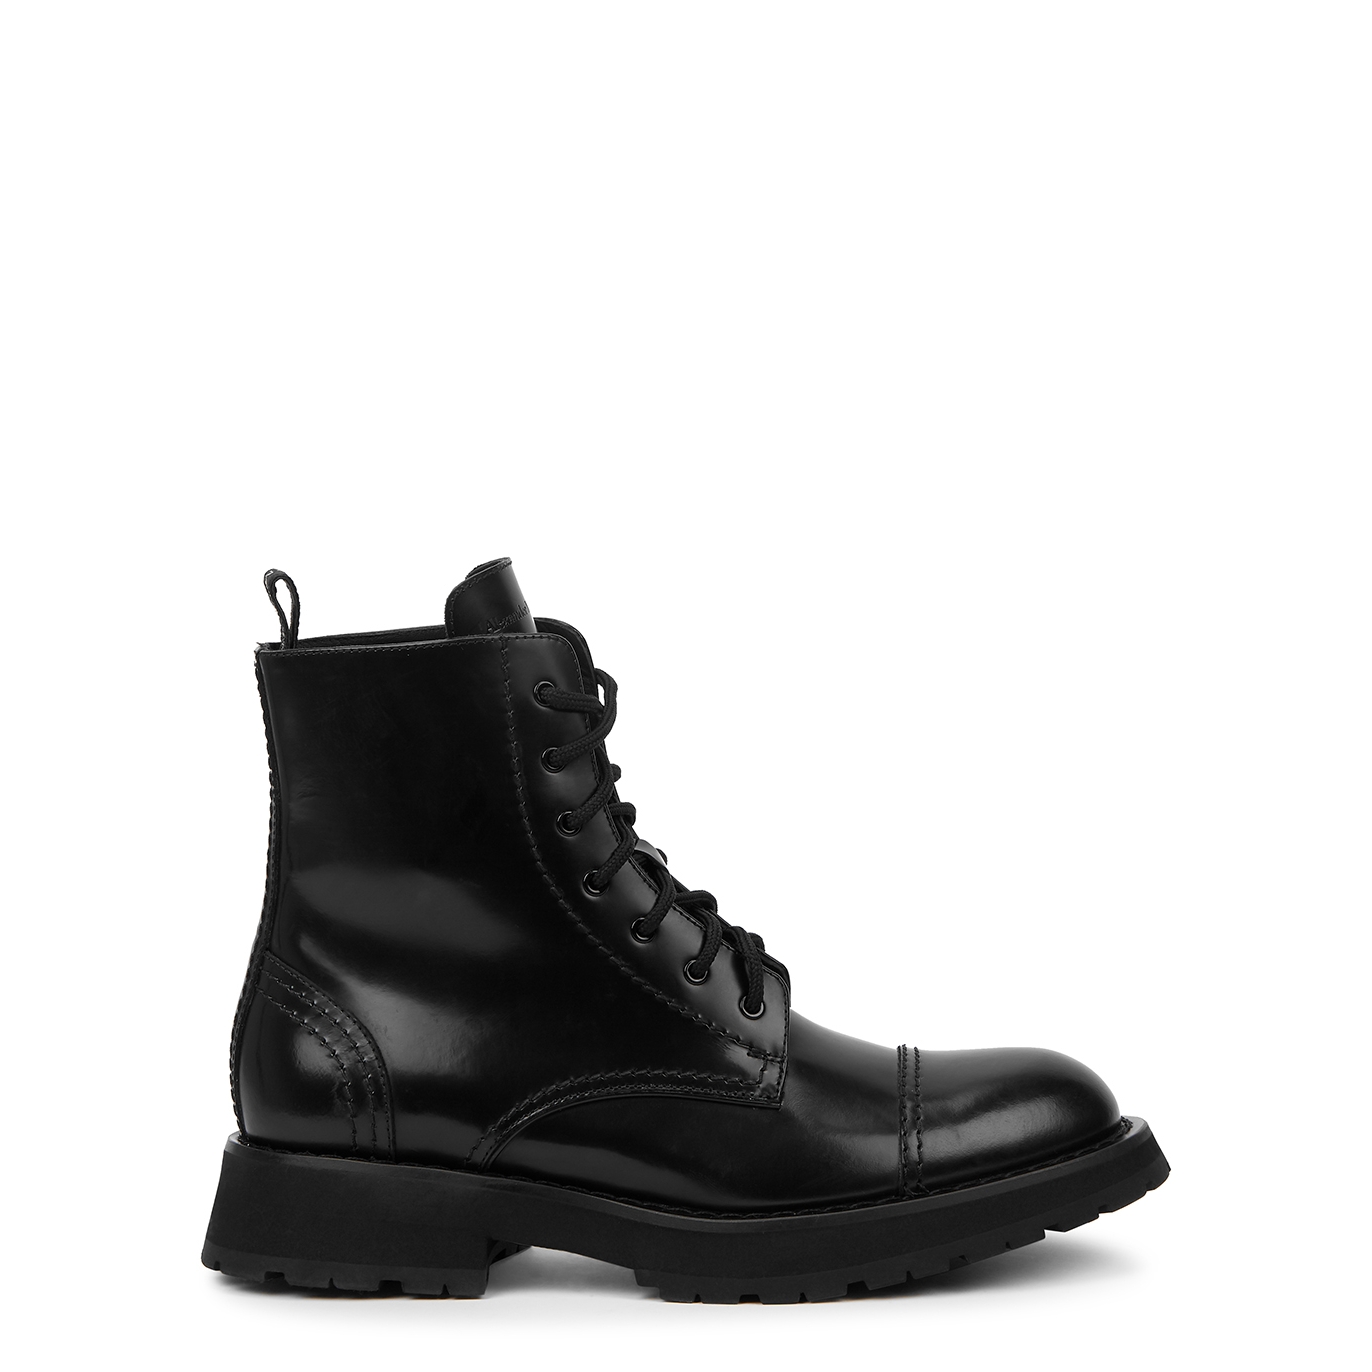 Alexander McQueen Black Leather Ankle Boots - 9